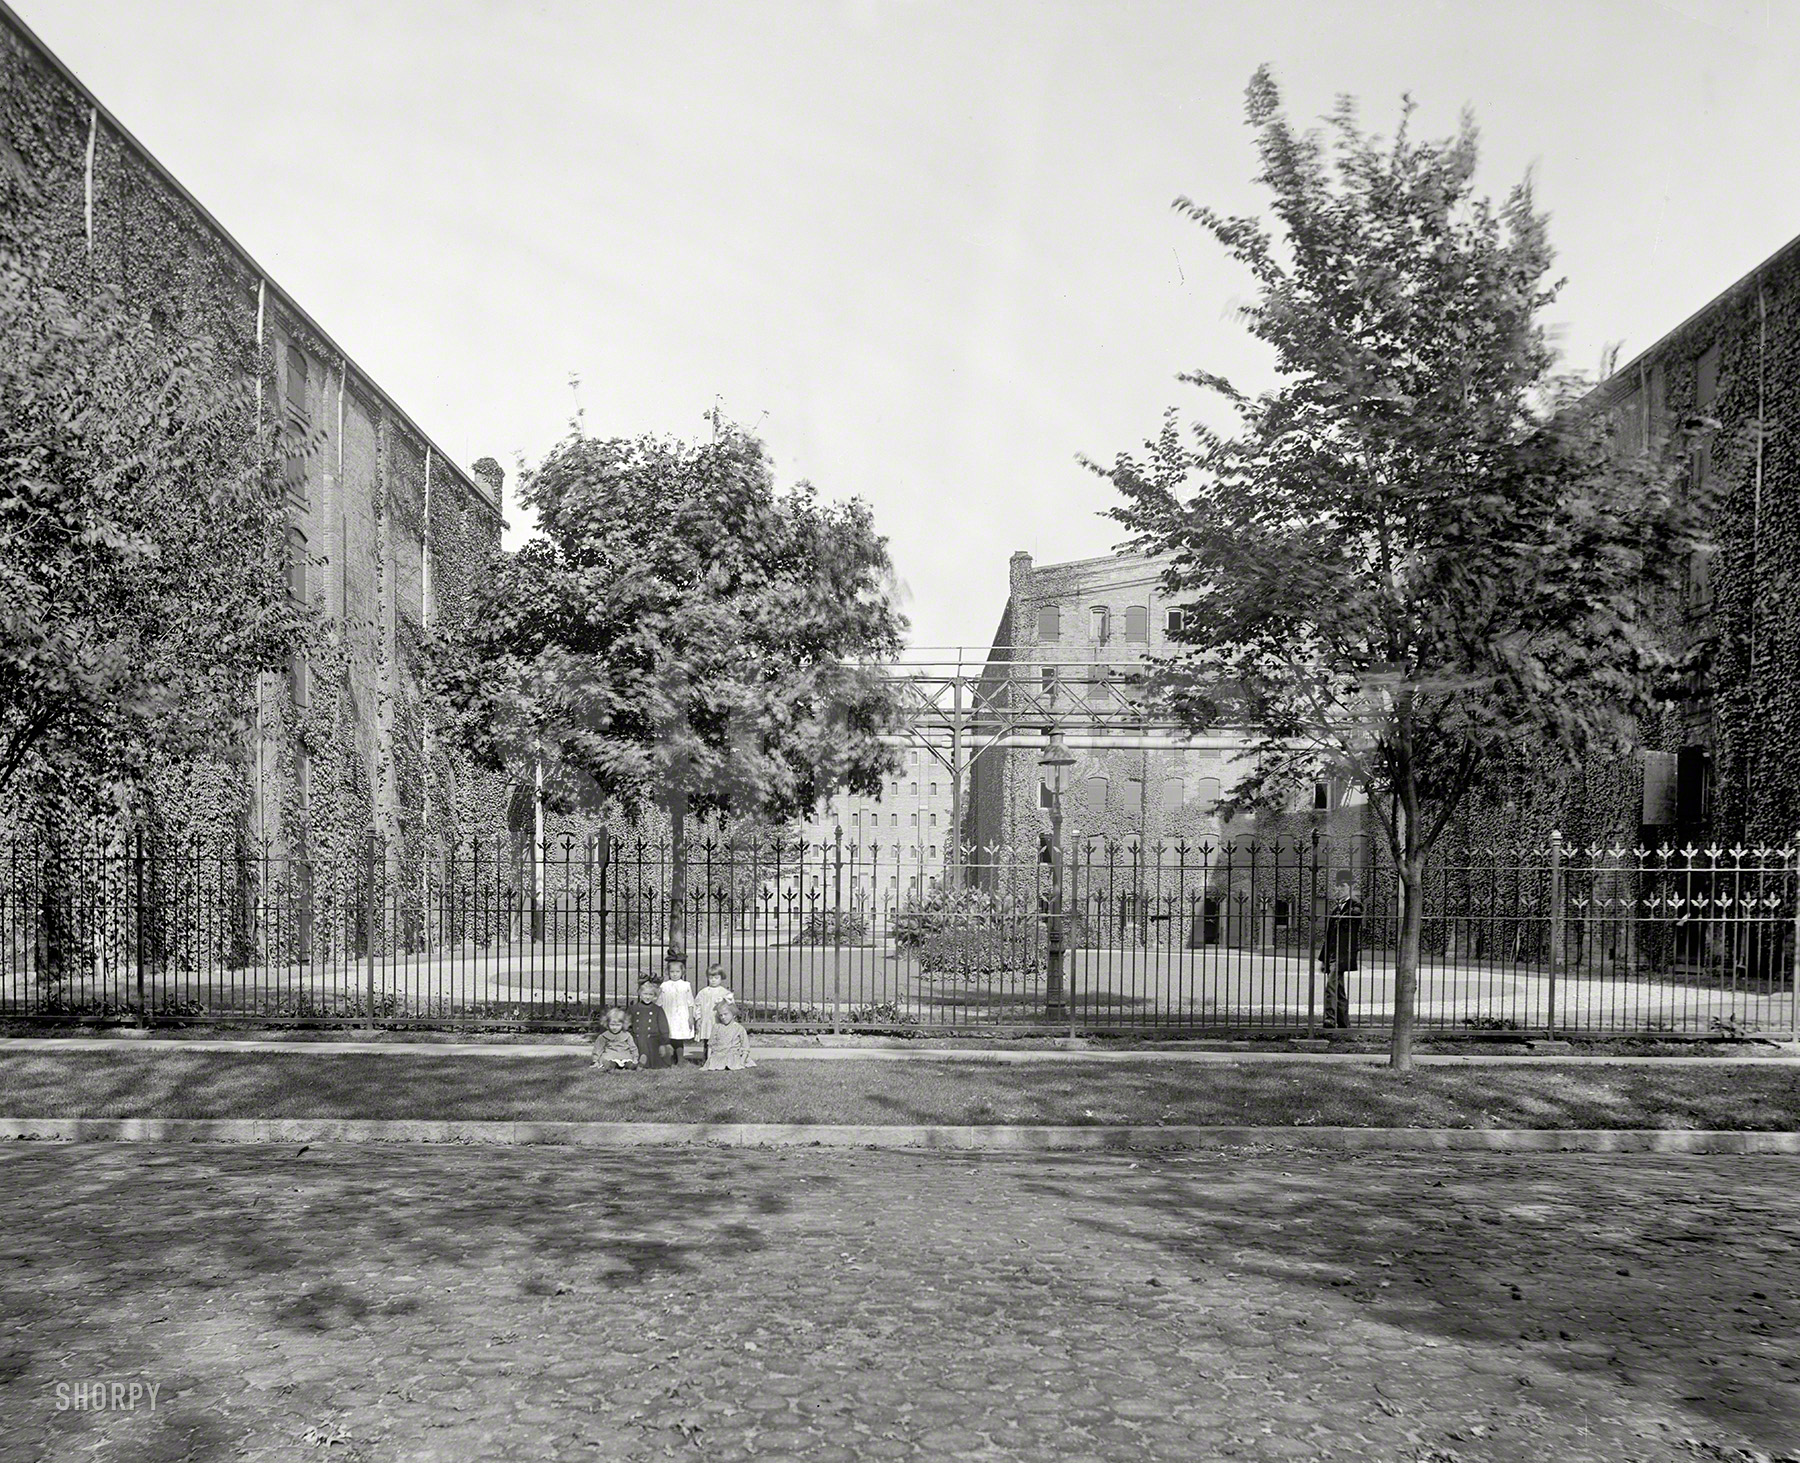 &nbsp; &nbsp; &nbsp; &nbsp; Little Ginny, Brandy, Bourbonnie, Tequila and Martini.
Circa 1910. "View between warehouses, Walker distillery, Walkerville, Ontario." 8x10 inch dry plate glass negative, Detroit Publishing Company. View full size.